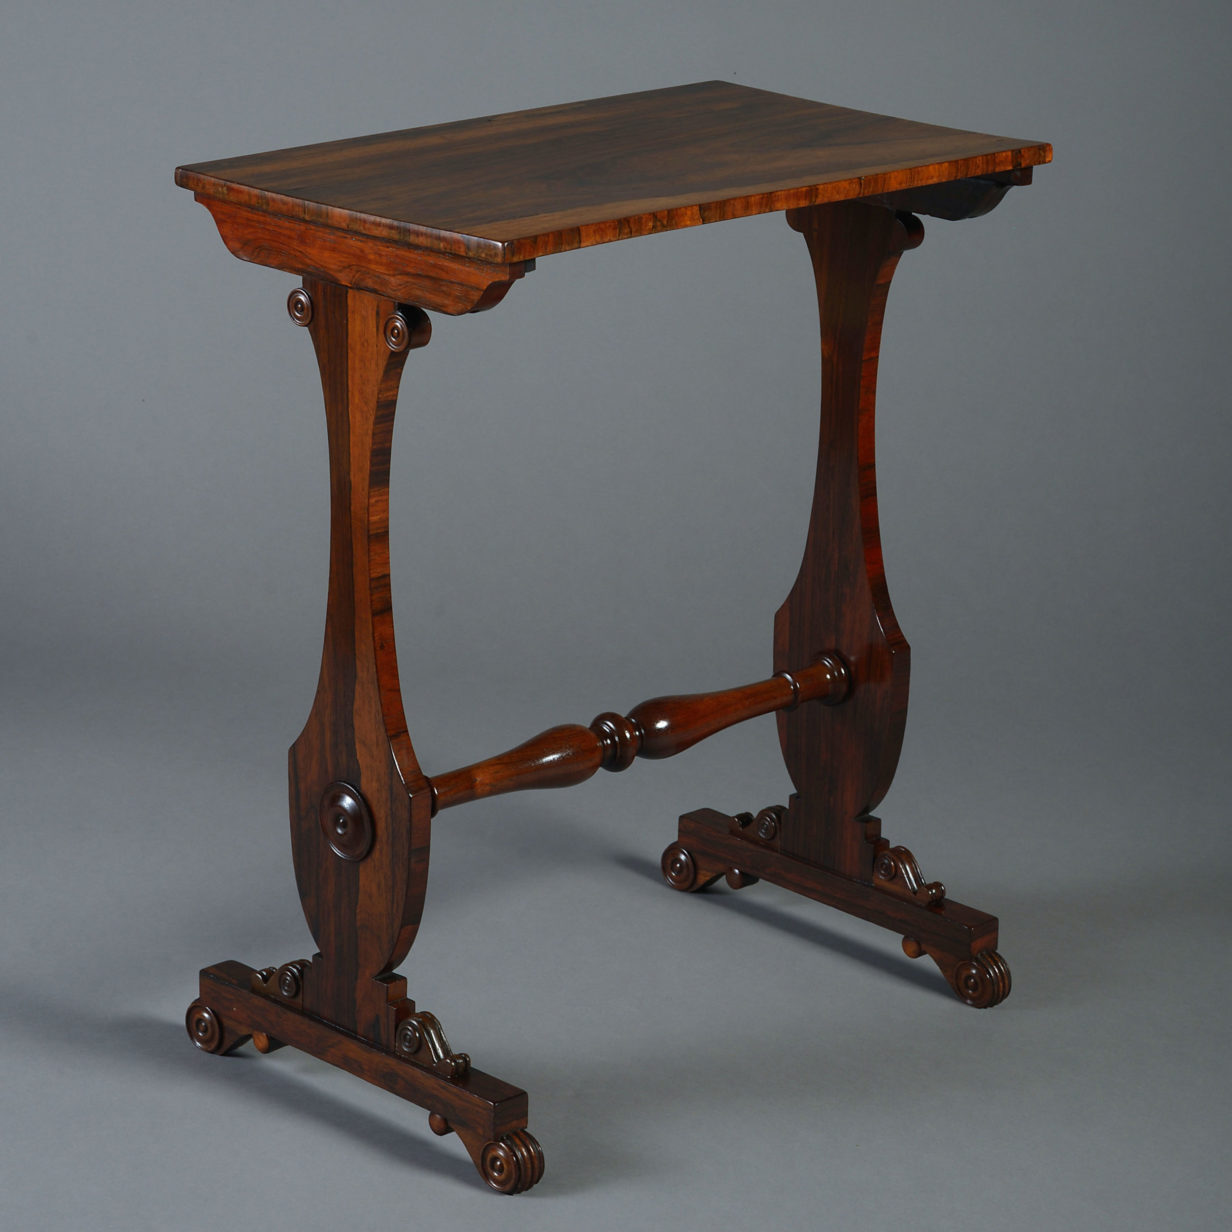 An early 19th century regency period rosewood occasional table